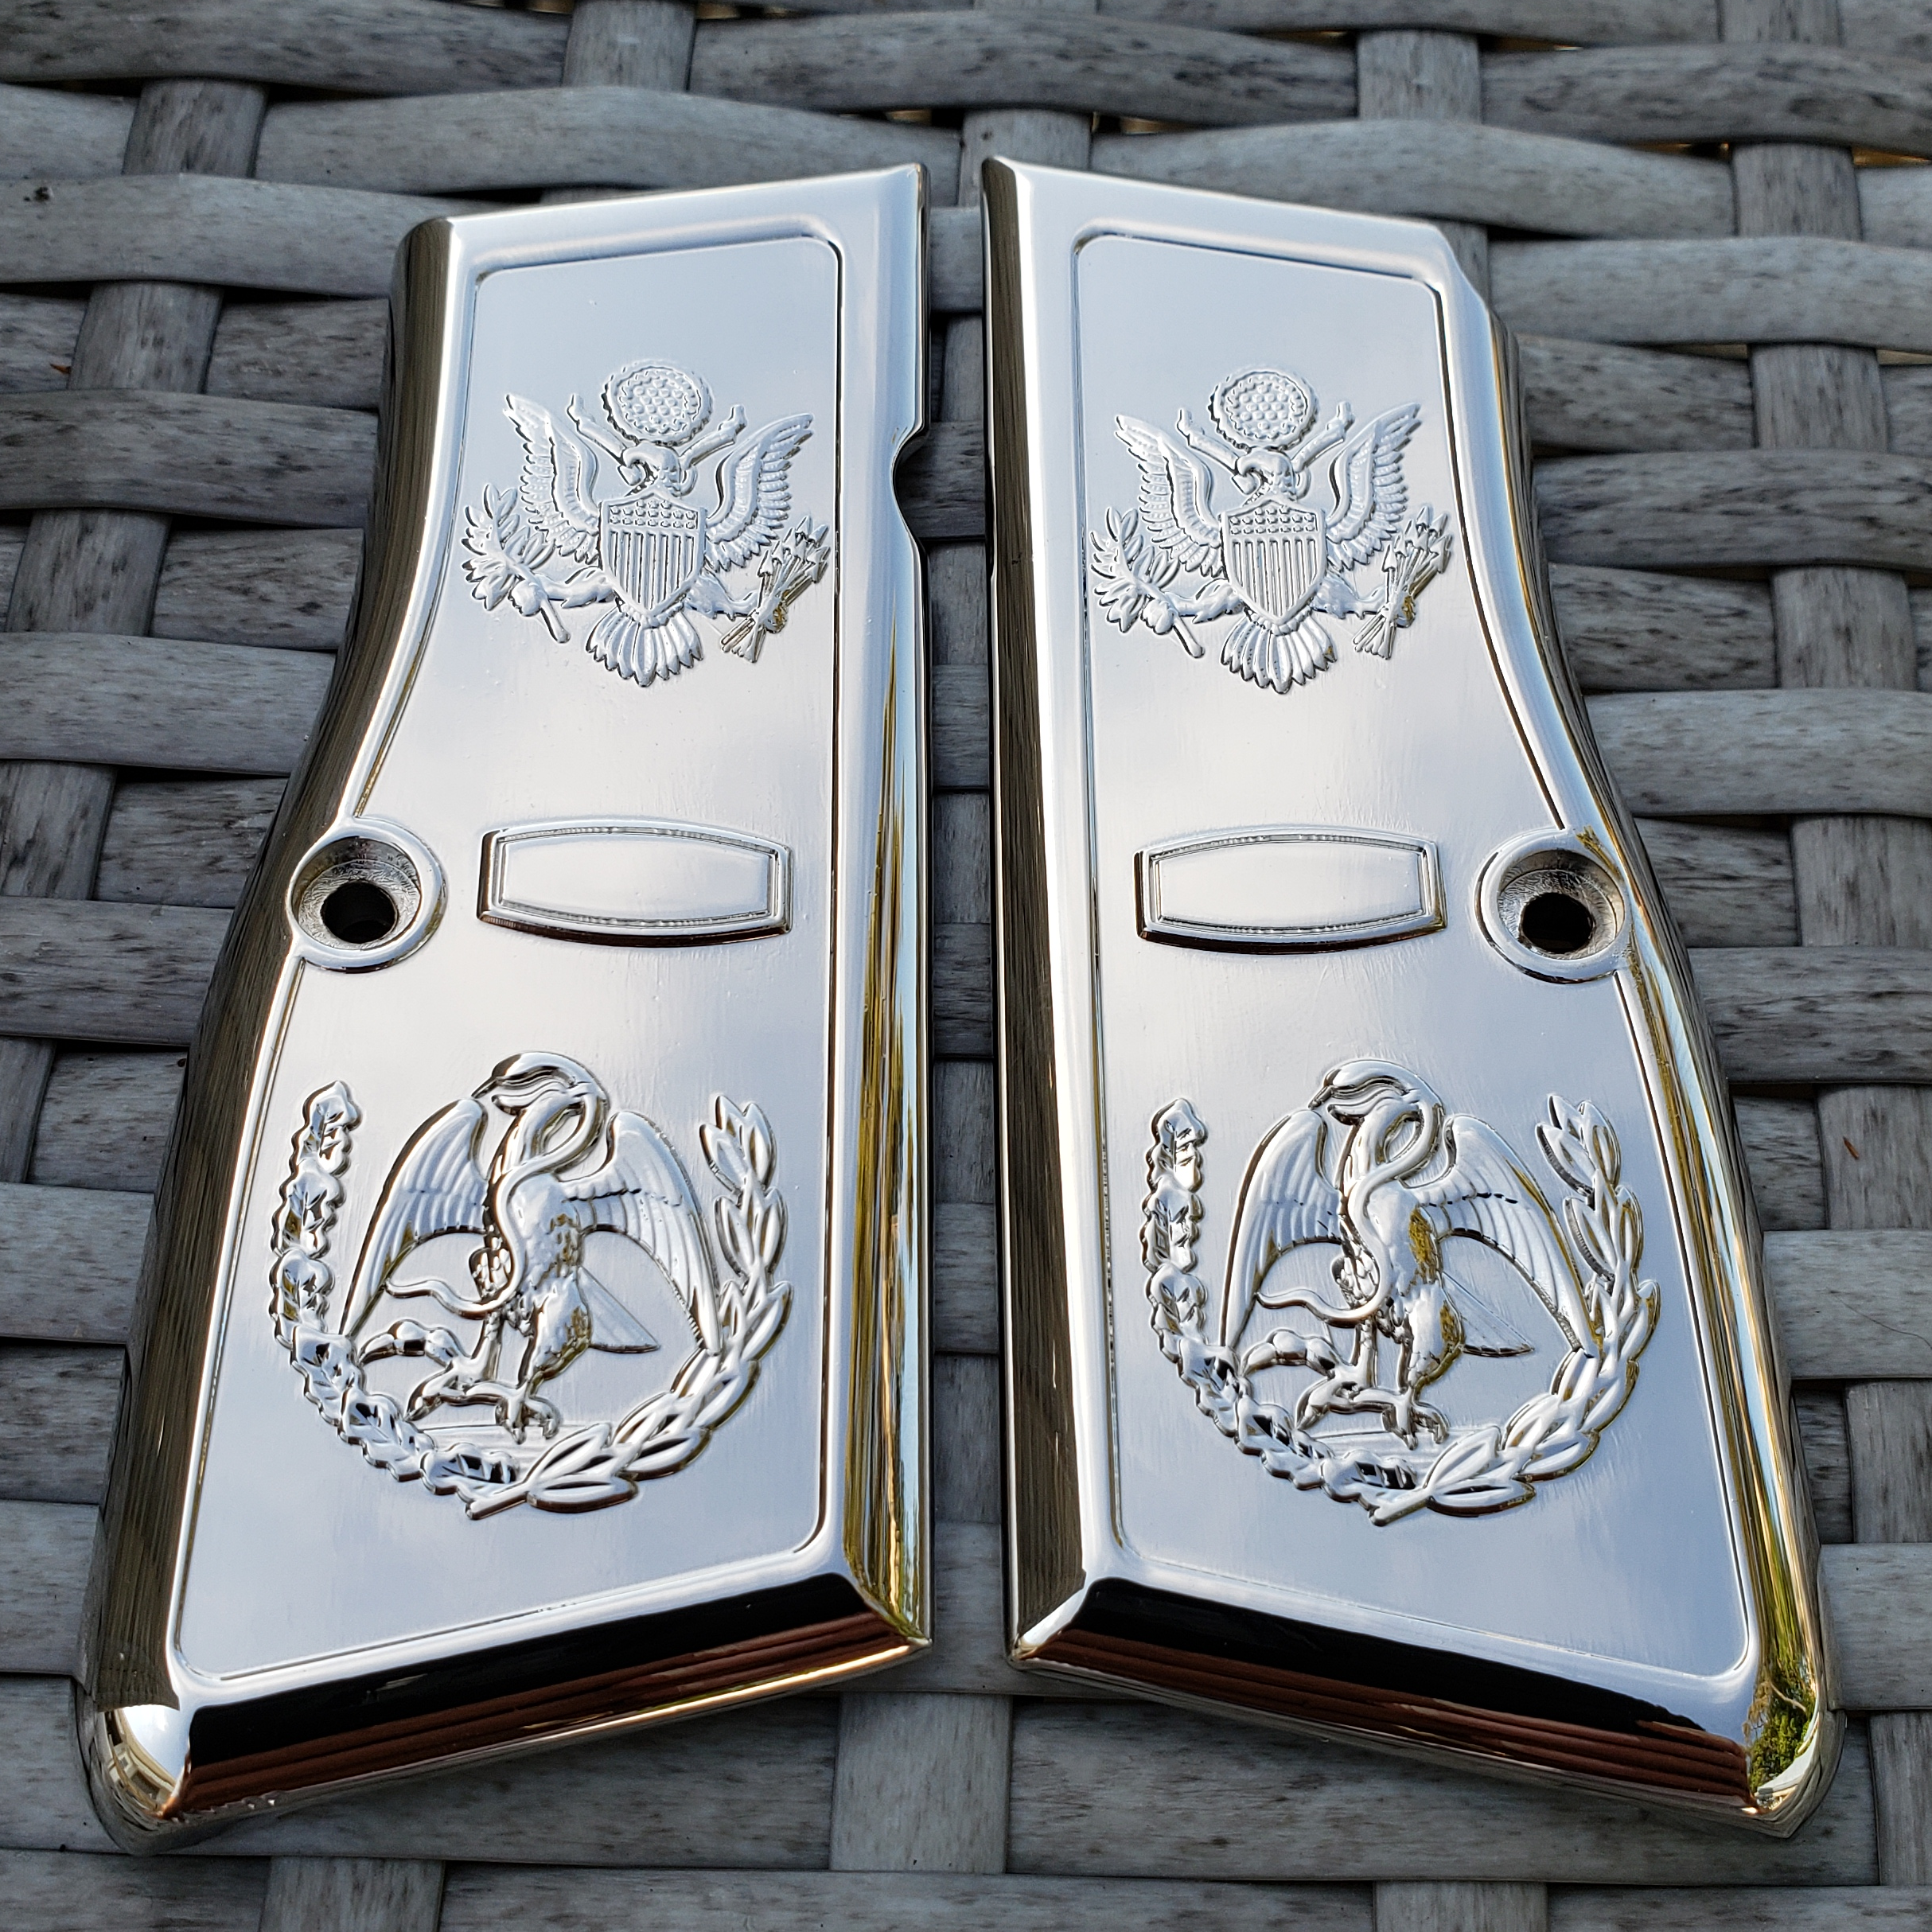 Browning Hi power Engraved Gun Grips Cacha Eagle Full Nickel Plated T-T397